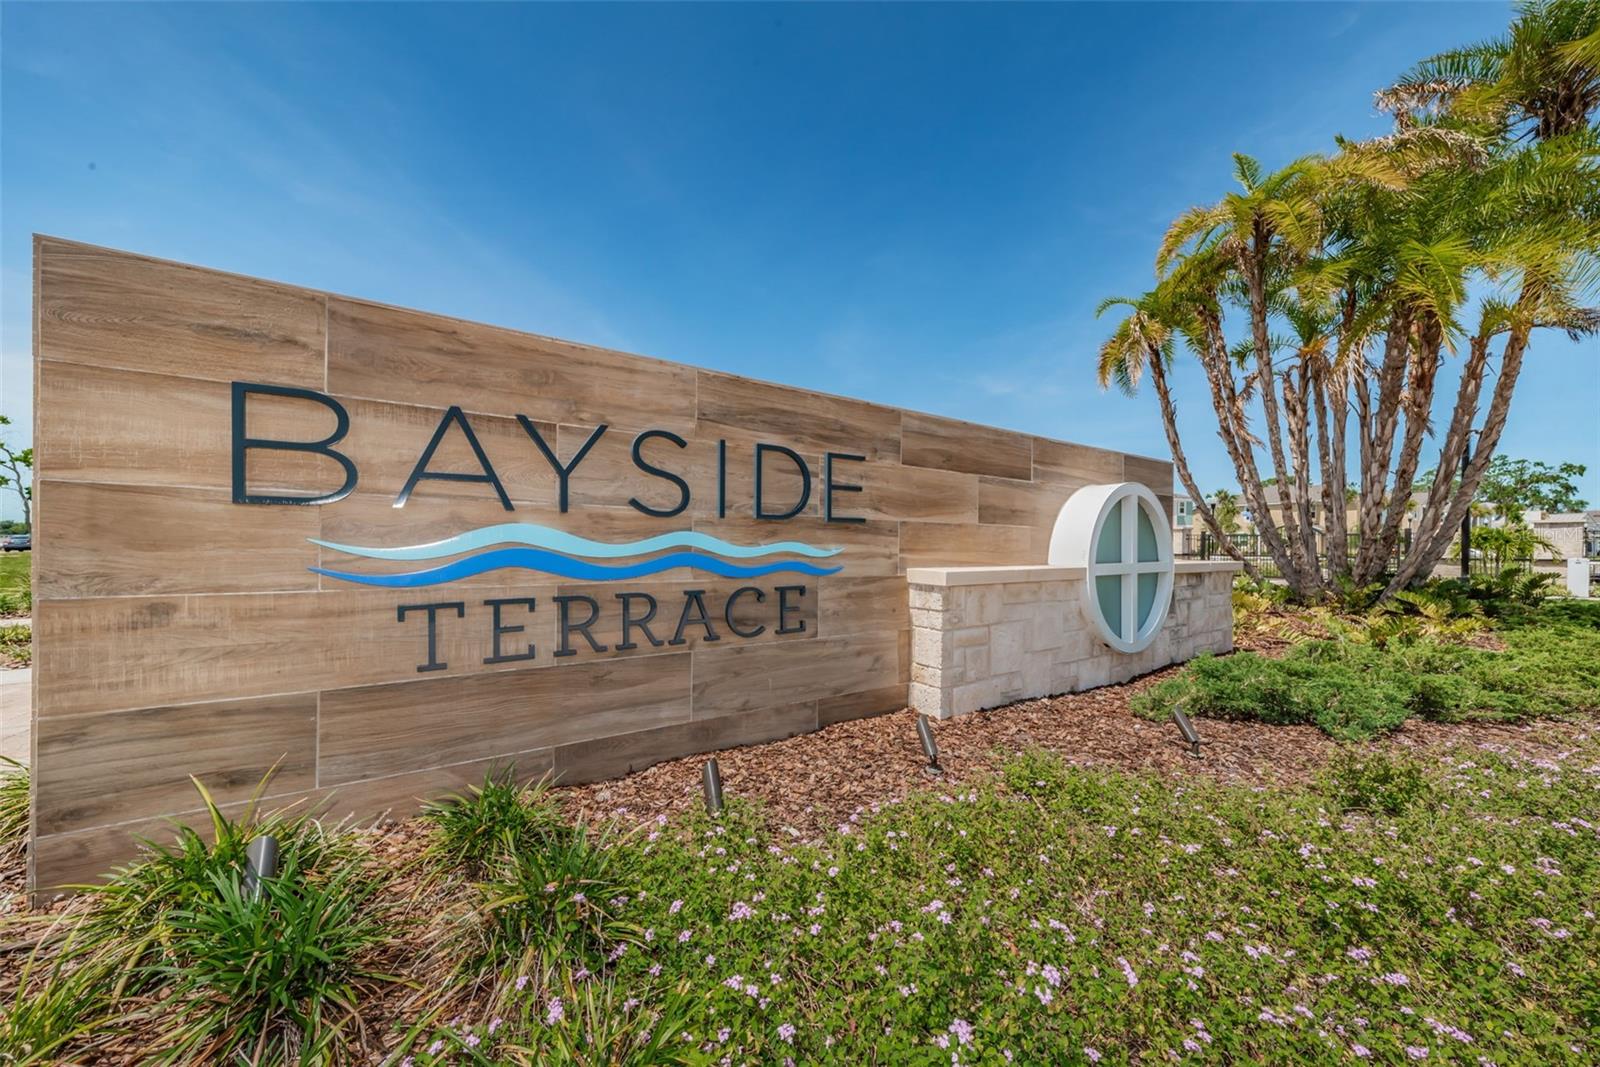 Bayside Terrace Gated Entry